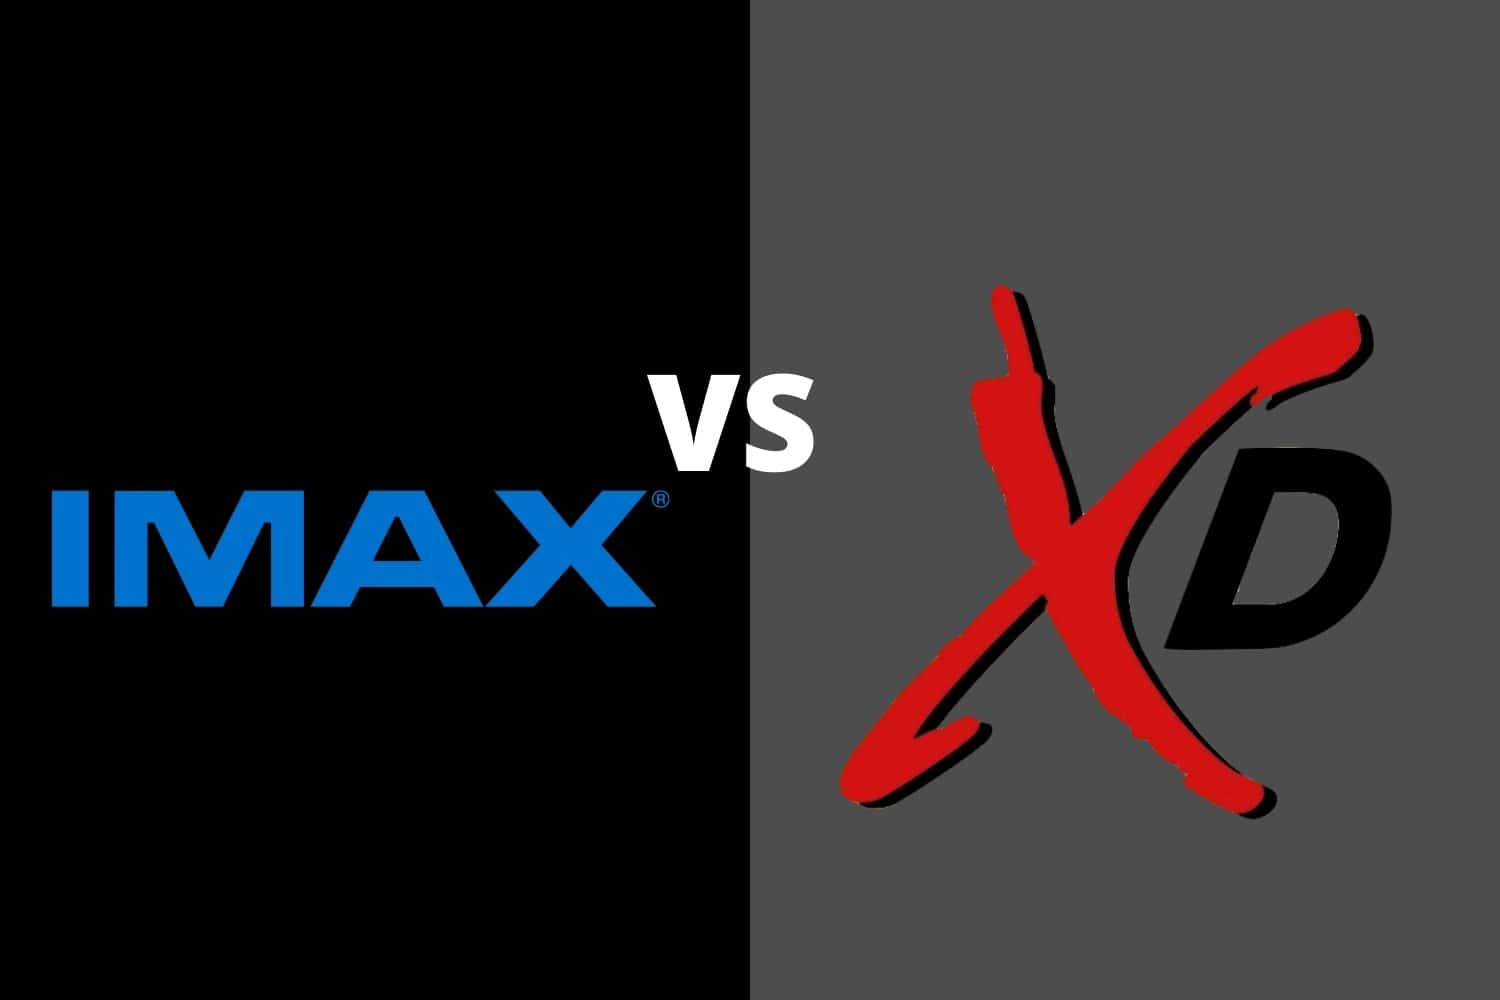 Cinemark XD vs IMAX: Where to watch movies in 2022? - Spacehop